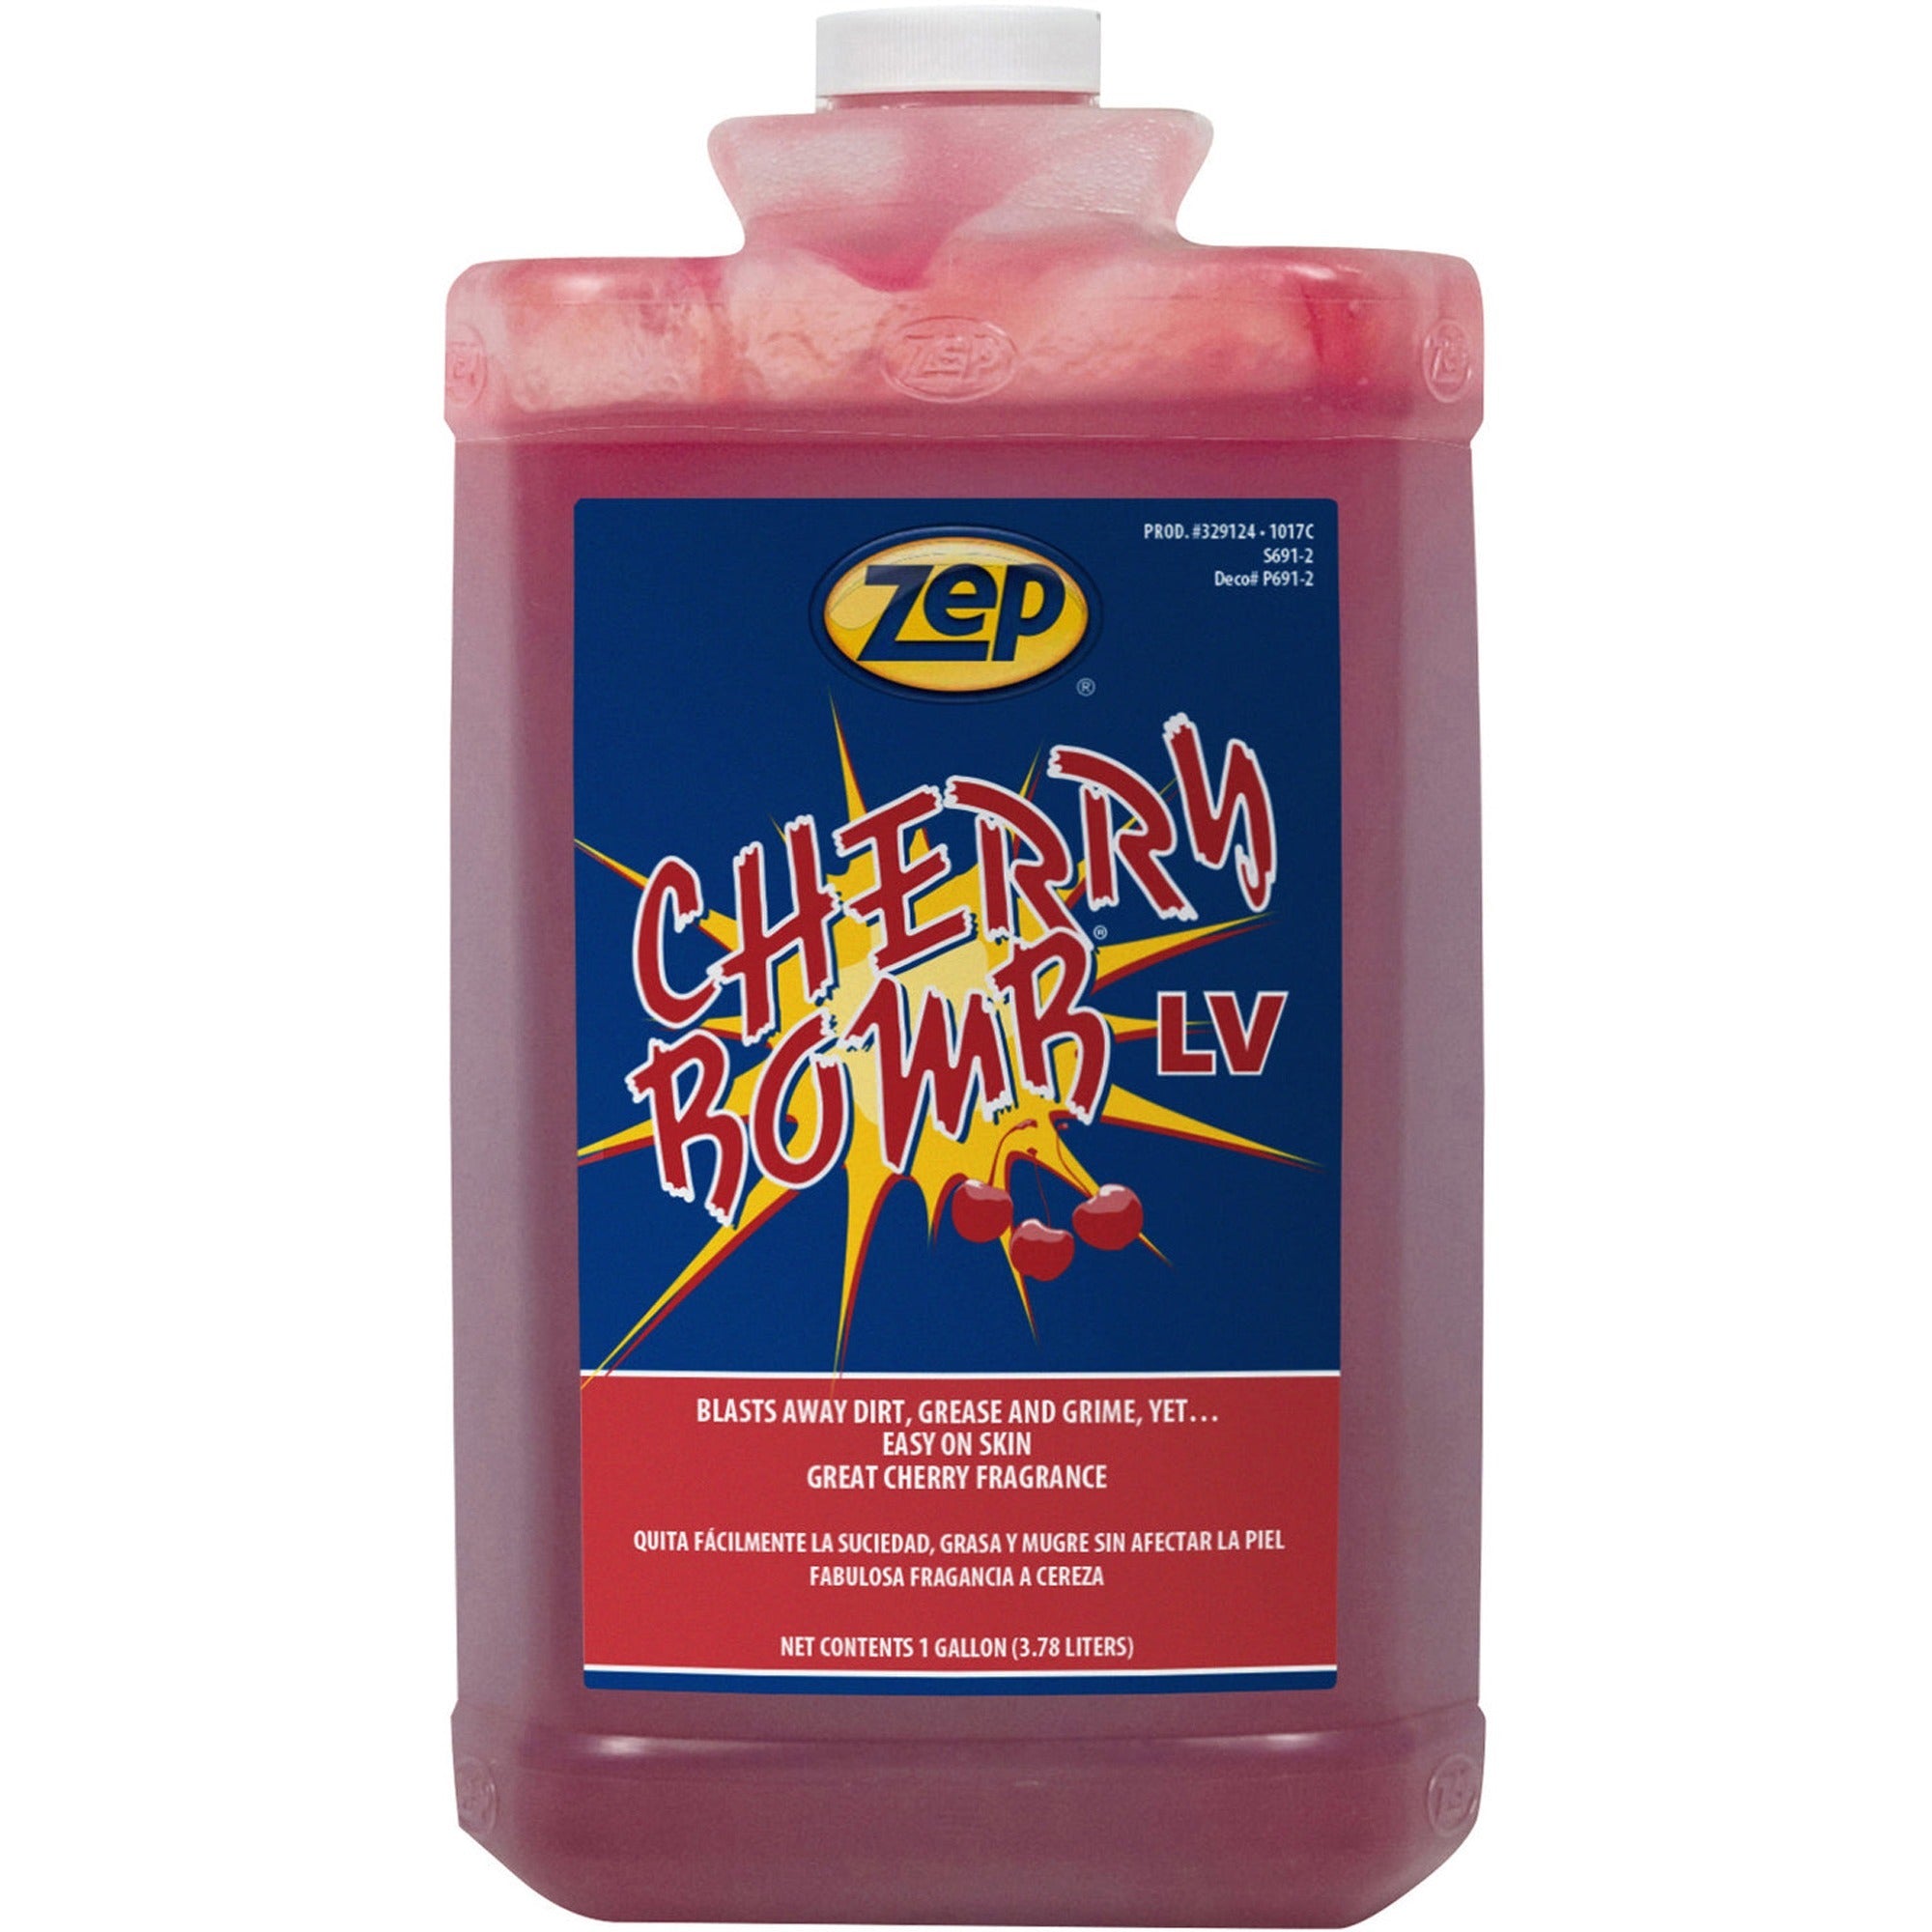 Zep Cherry Bomb LV Industrial Hand Cleaner - Cherry ScentFor - 1 gal (3.8 L) - Dirt Remover, Grime Remover, Soil Remover, Ink Remover, Resin Remover, Paint Remover, Adhesive Remover, Tar Remover, Asphalt Remover, Odor Remover, Grease Remover - Hand,